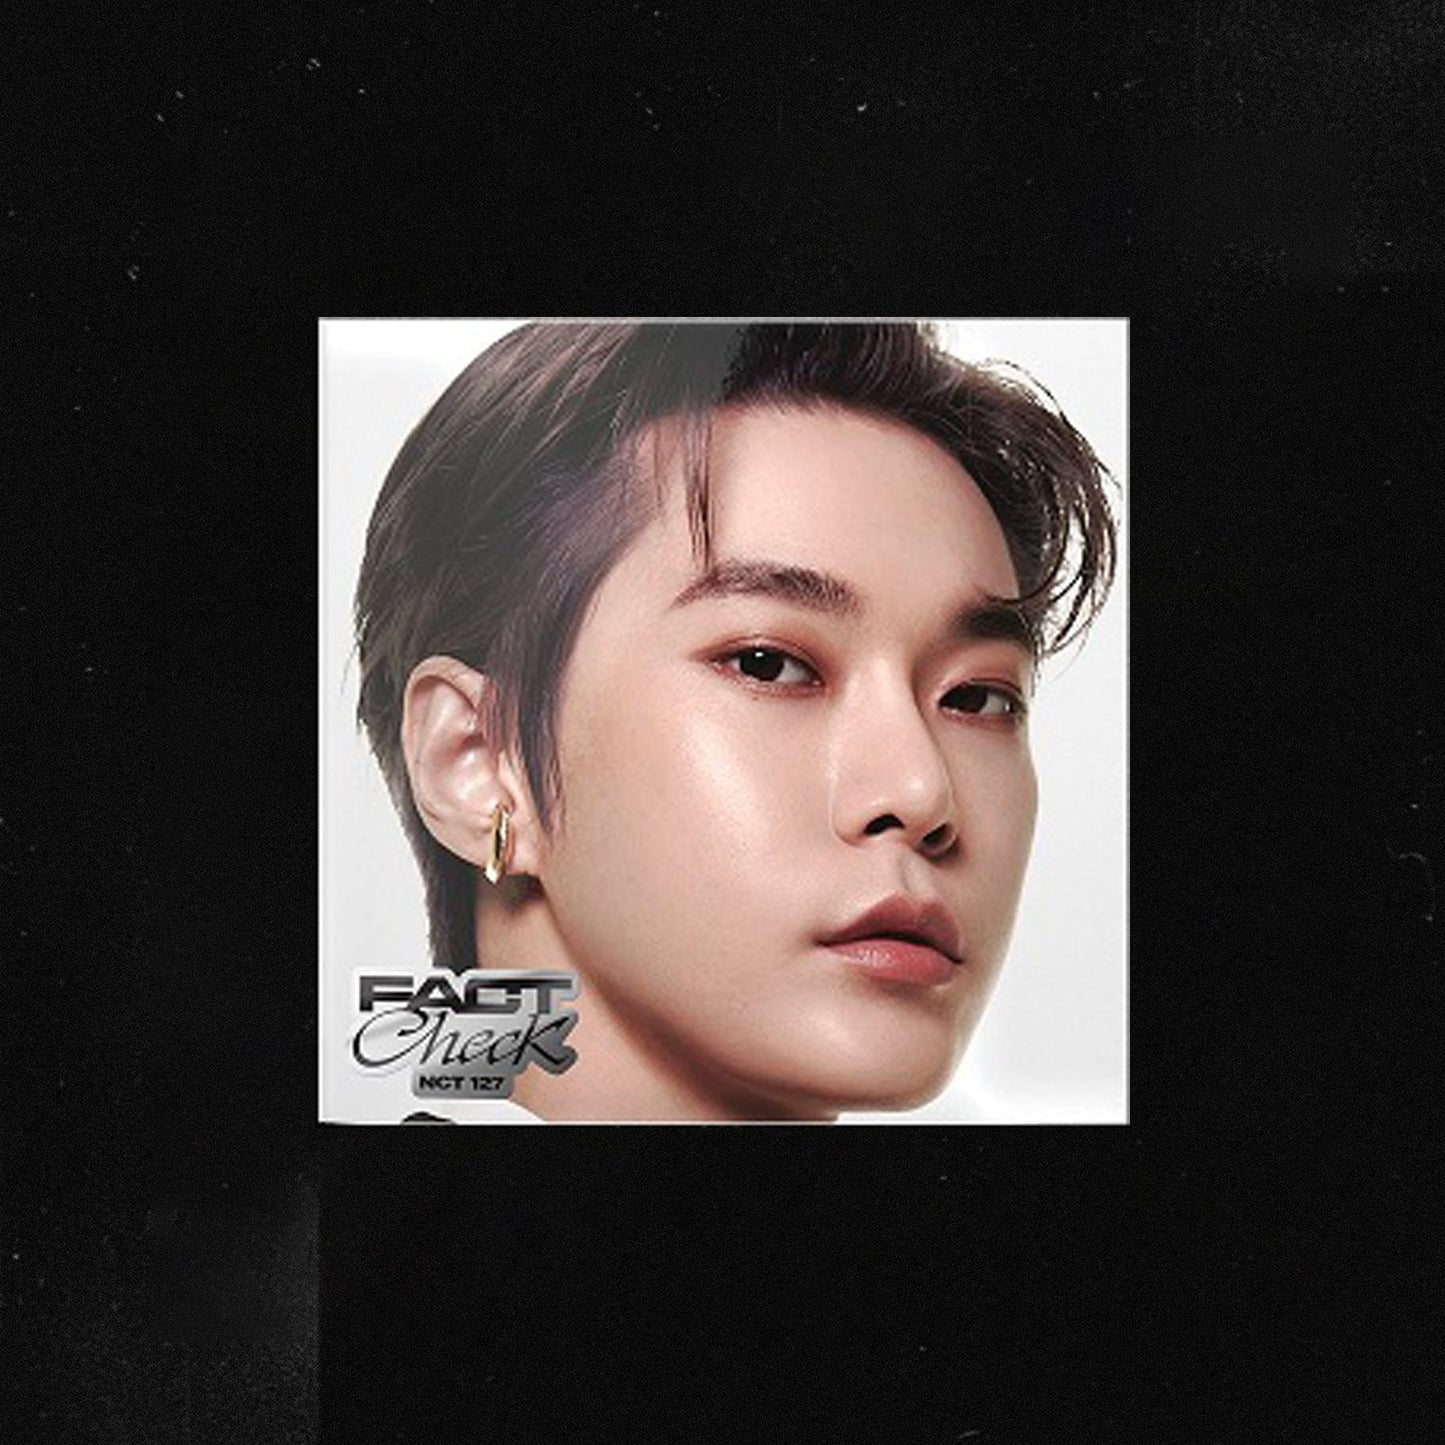 NCT 127 5TH ALBUM 'FACT CHECK' (EXHIBIT) DOYOUNG VERSION COVER